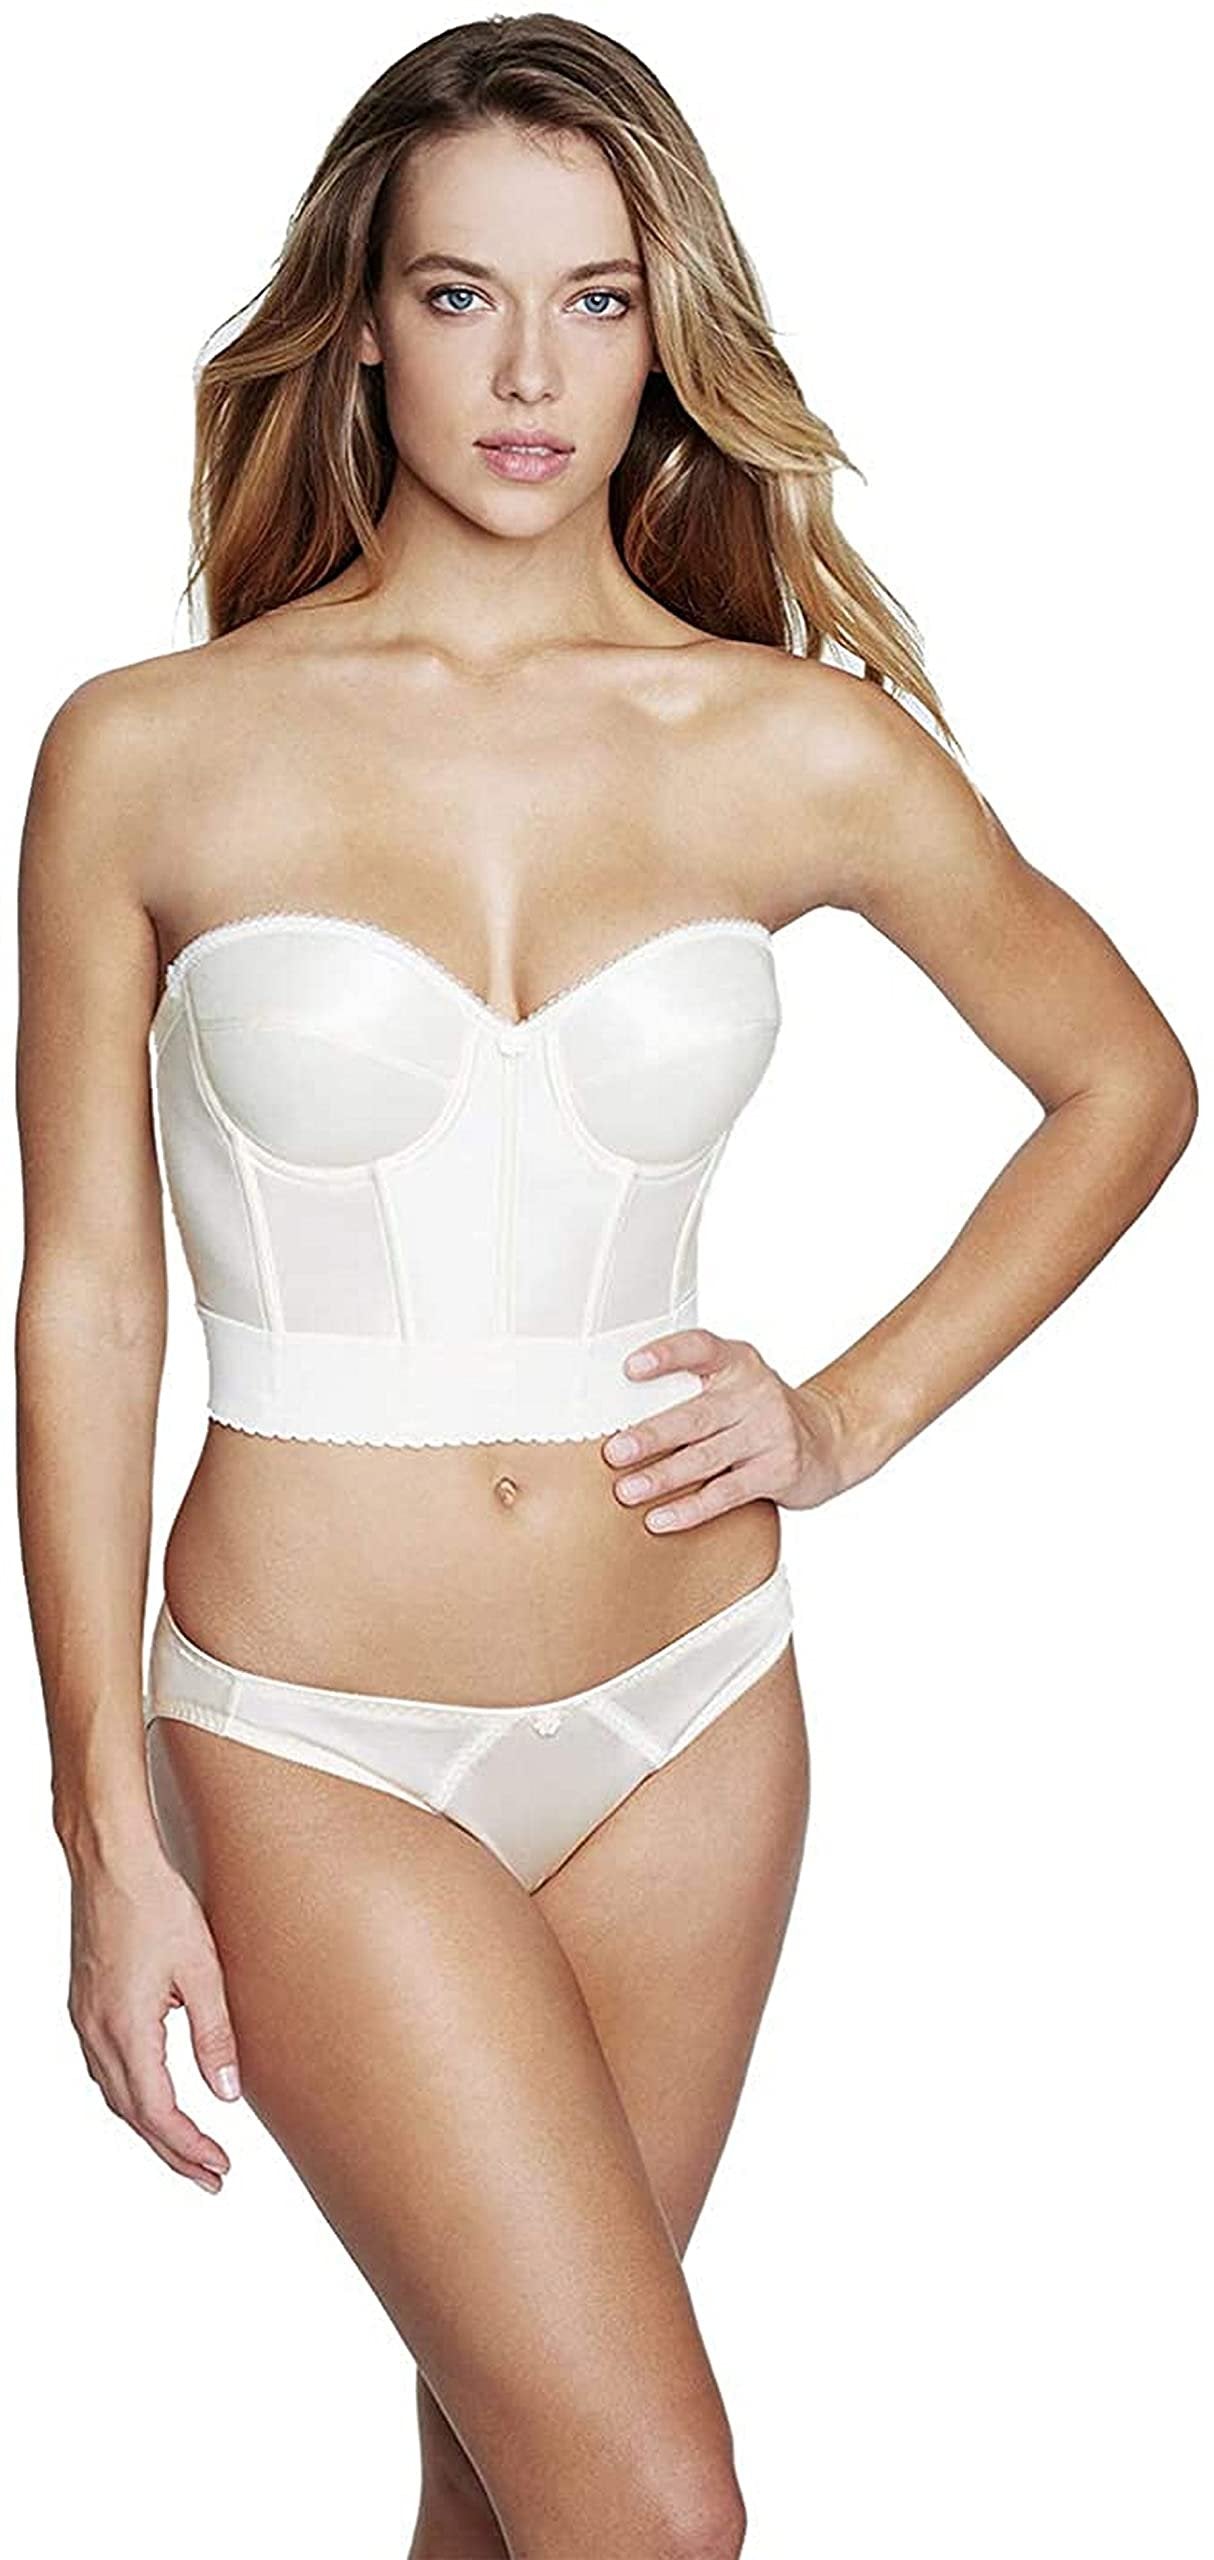 New Dominique Noemi Strapless Backless Bra Ivory 42DD - Free Shipping & Returns